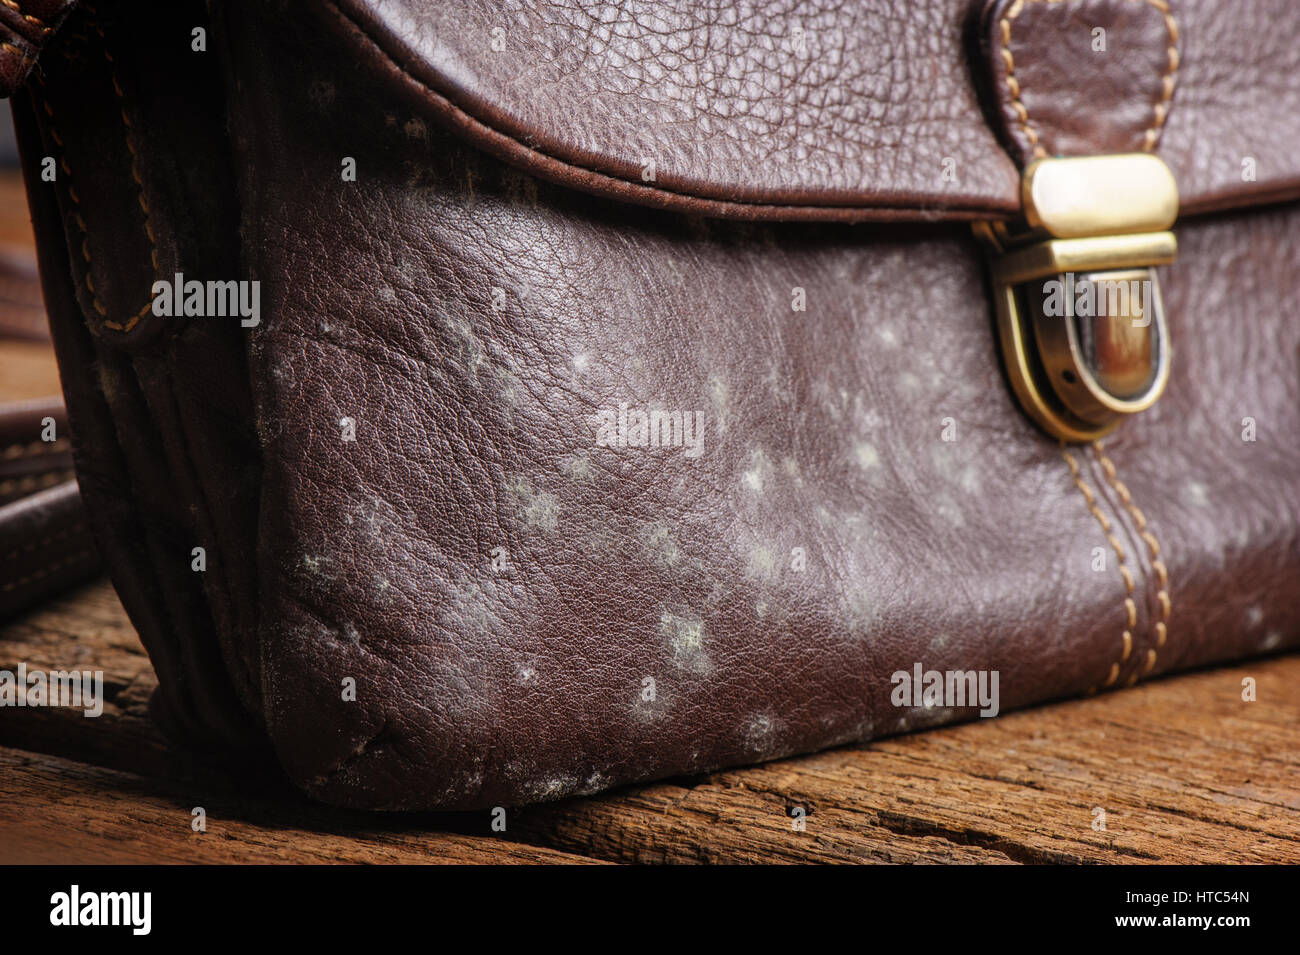 mould on old brown leather bag, fungus on leather bag Stock Photo